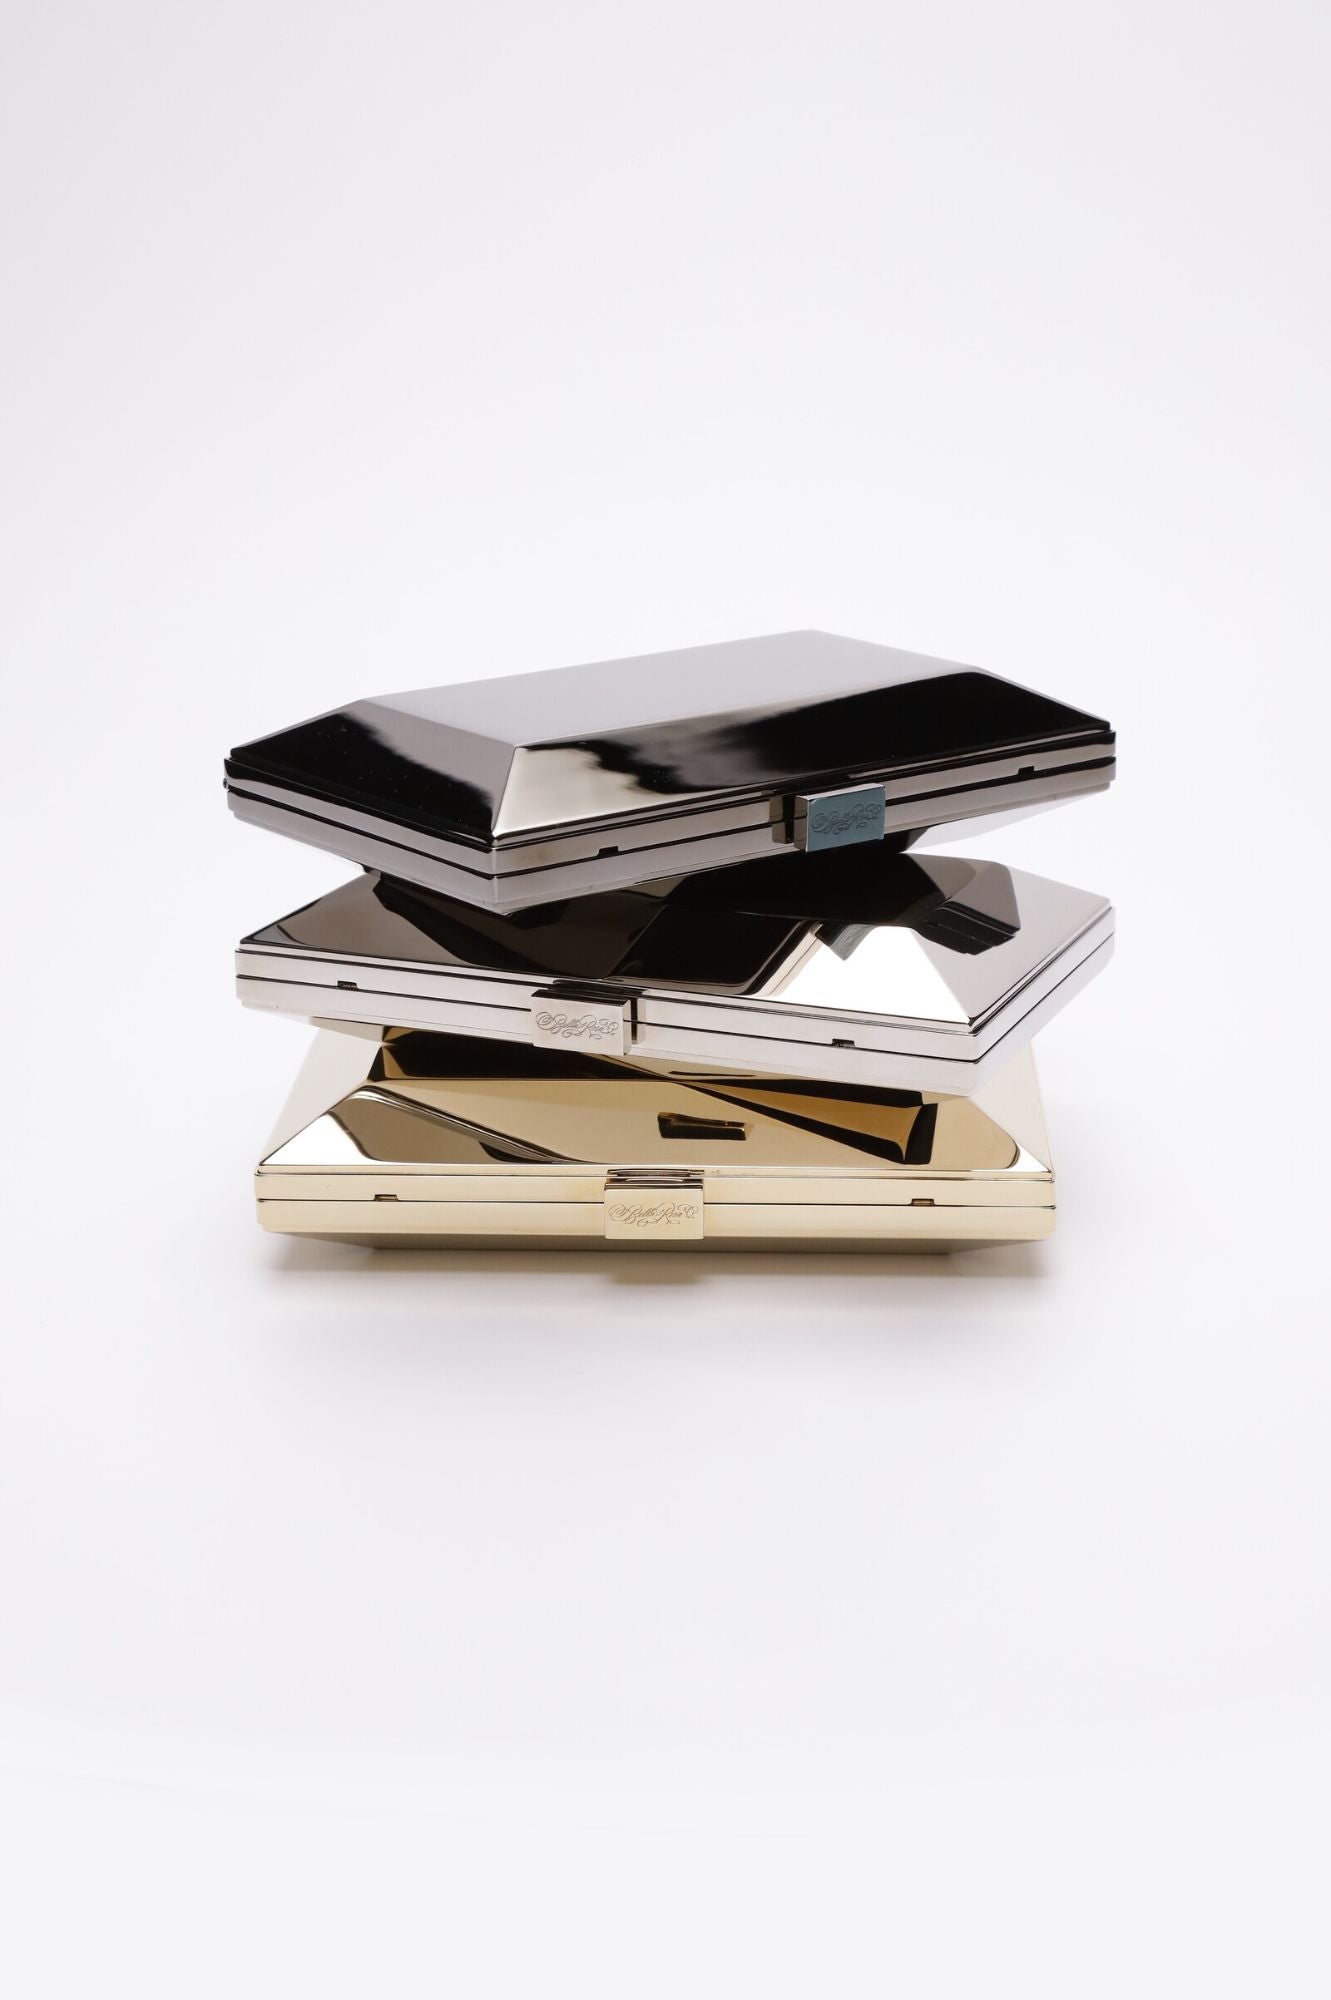 Three Milan Clutches stacked on top of each other against a white background.